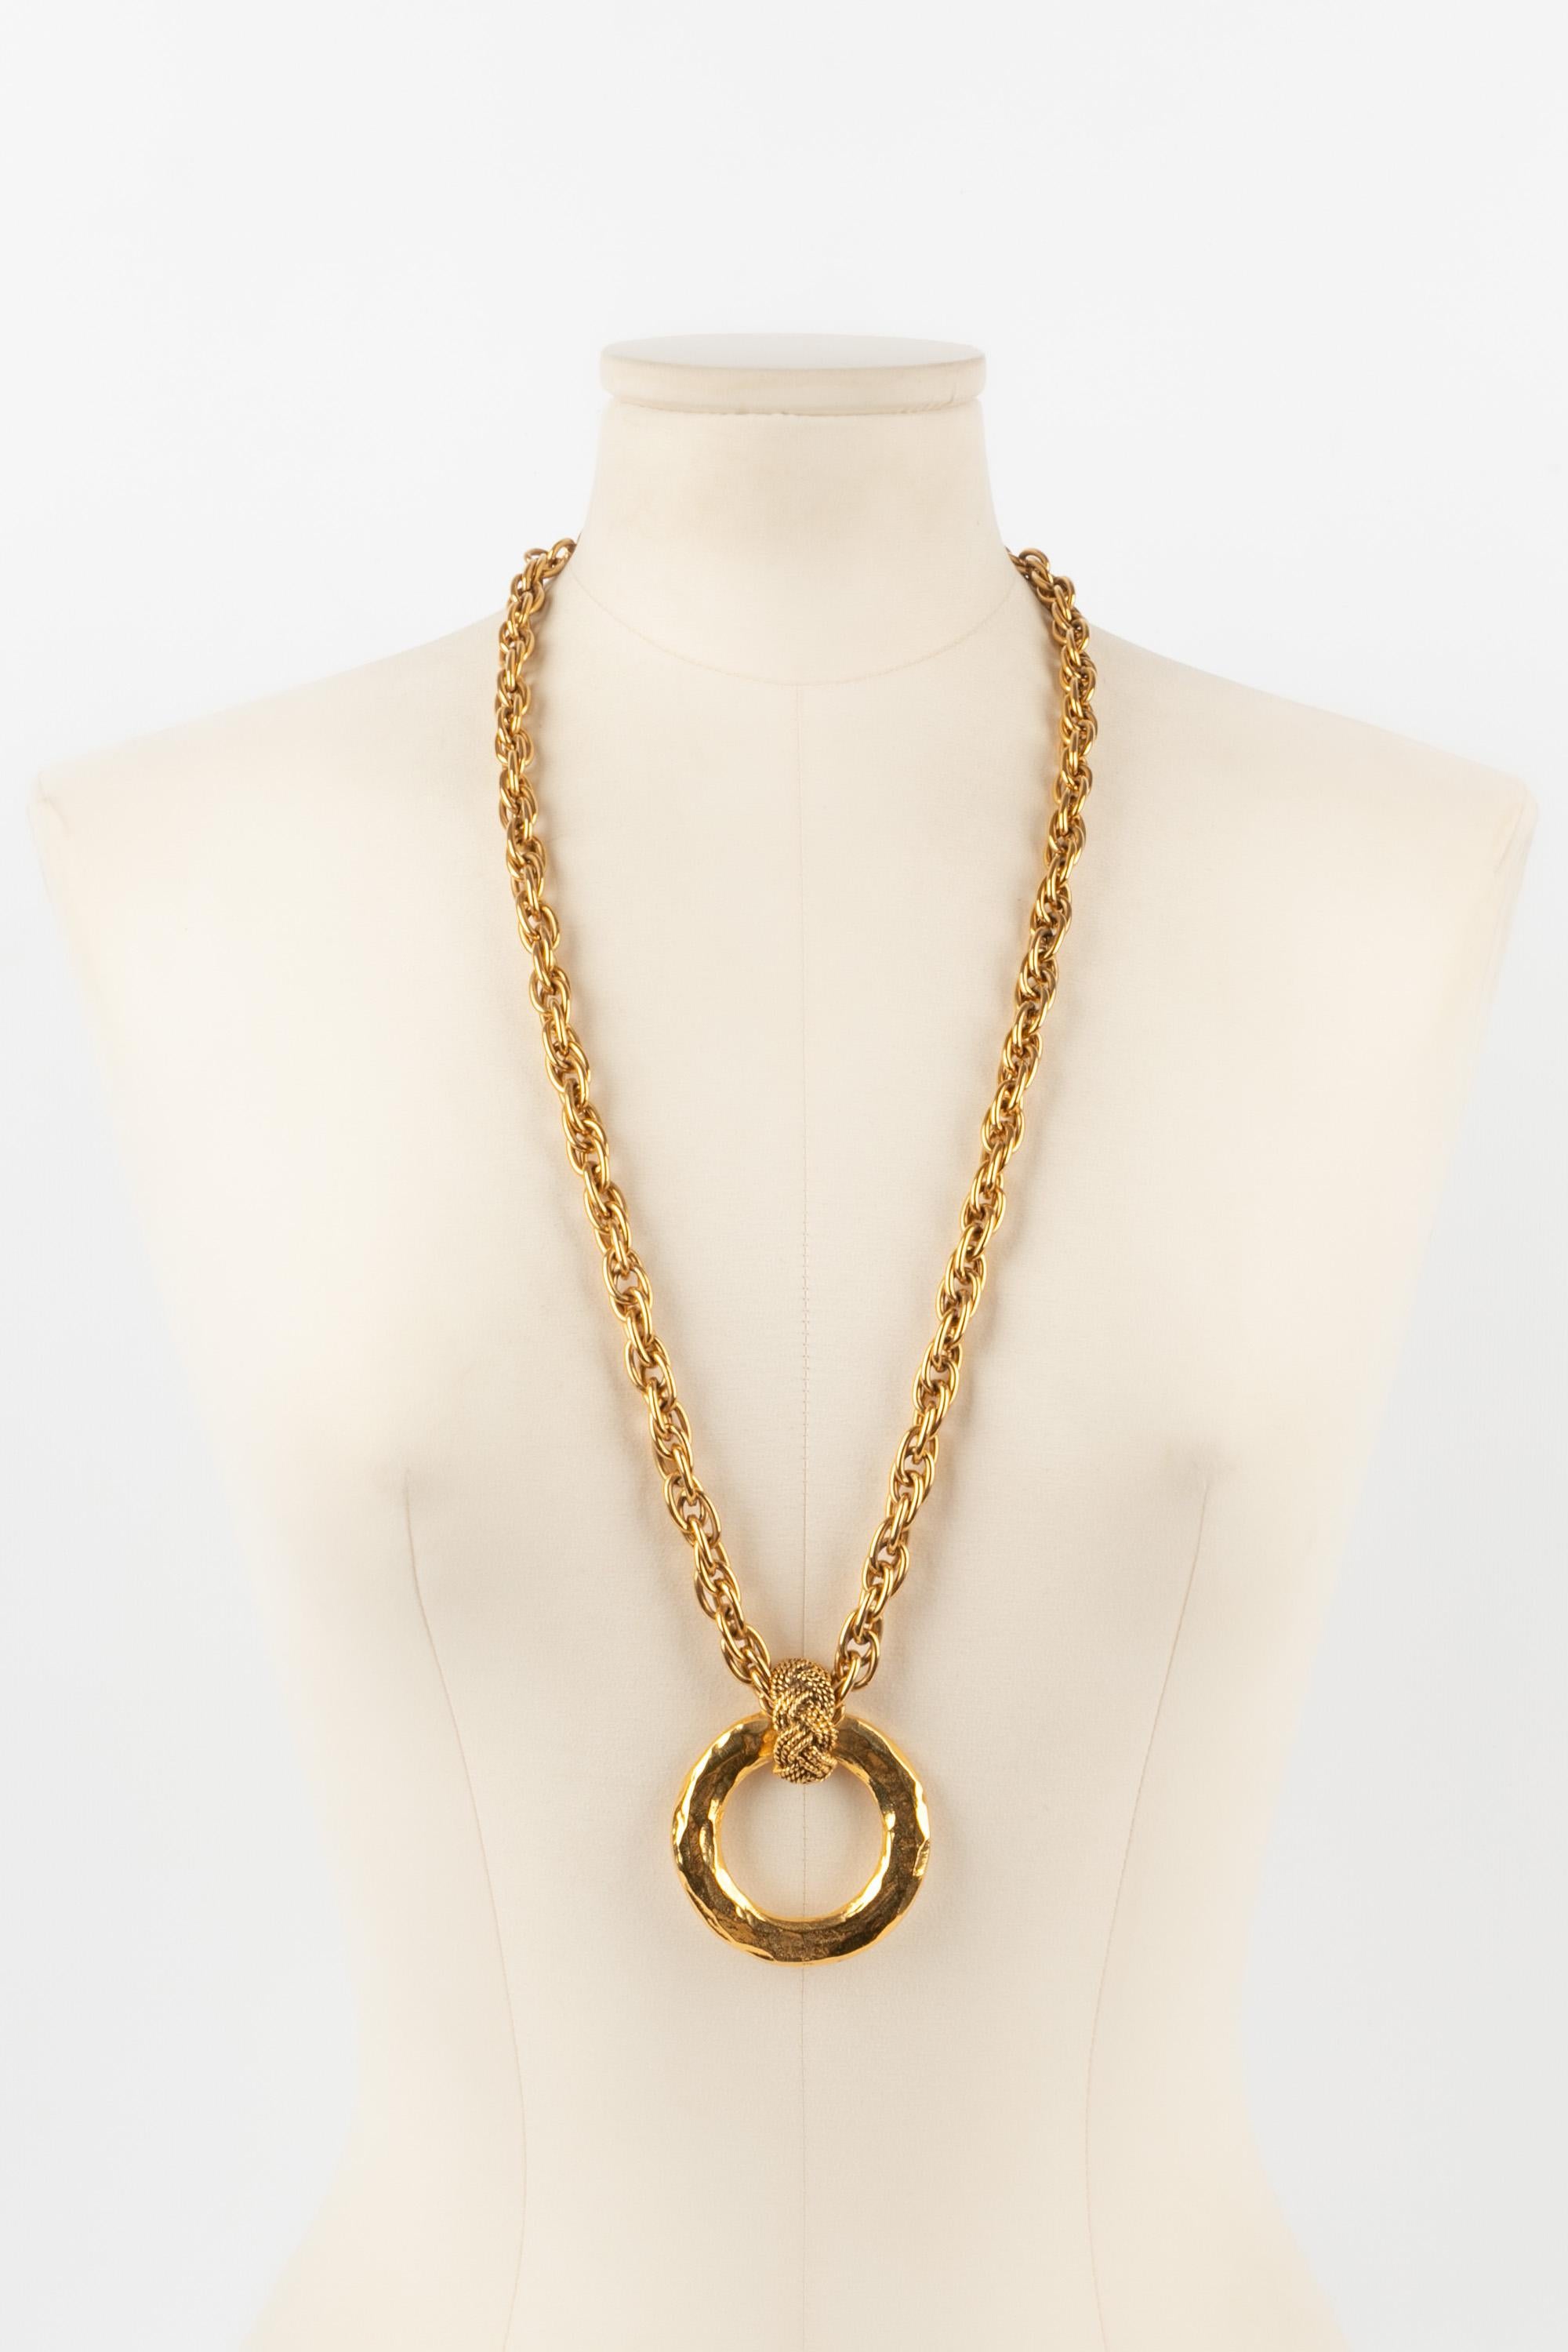 CHANEL - (Made in France) Golden metal necklace with a circular pendant. Jewelry from the 1980s.

Condition:
Very good condition

Dimensions:
Length: 78 cm

CB269